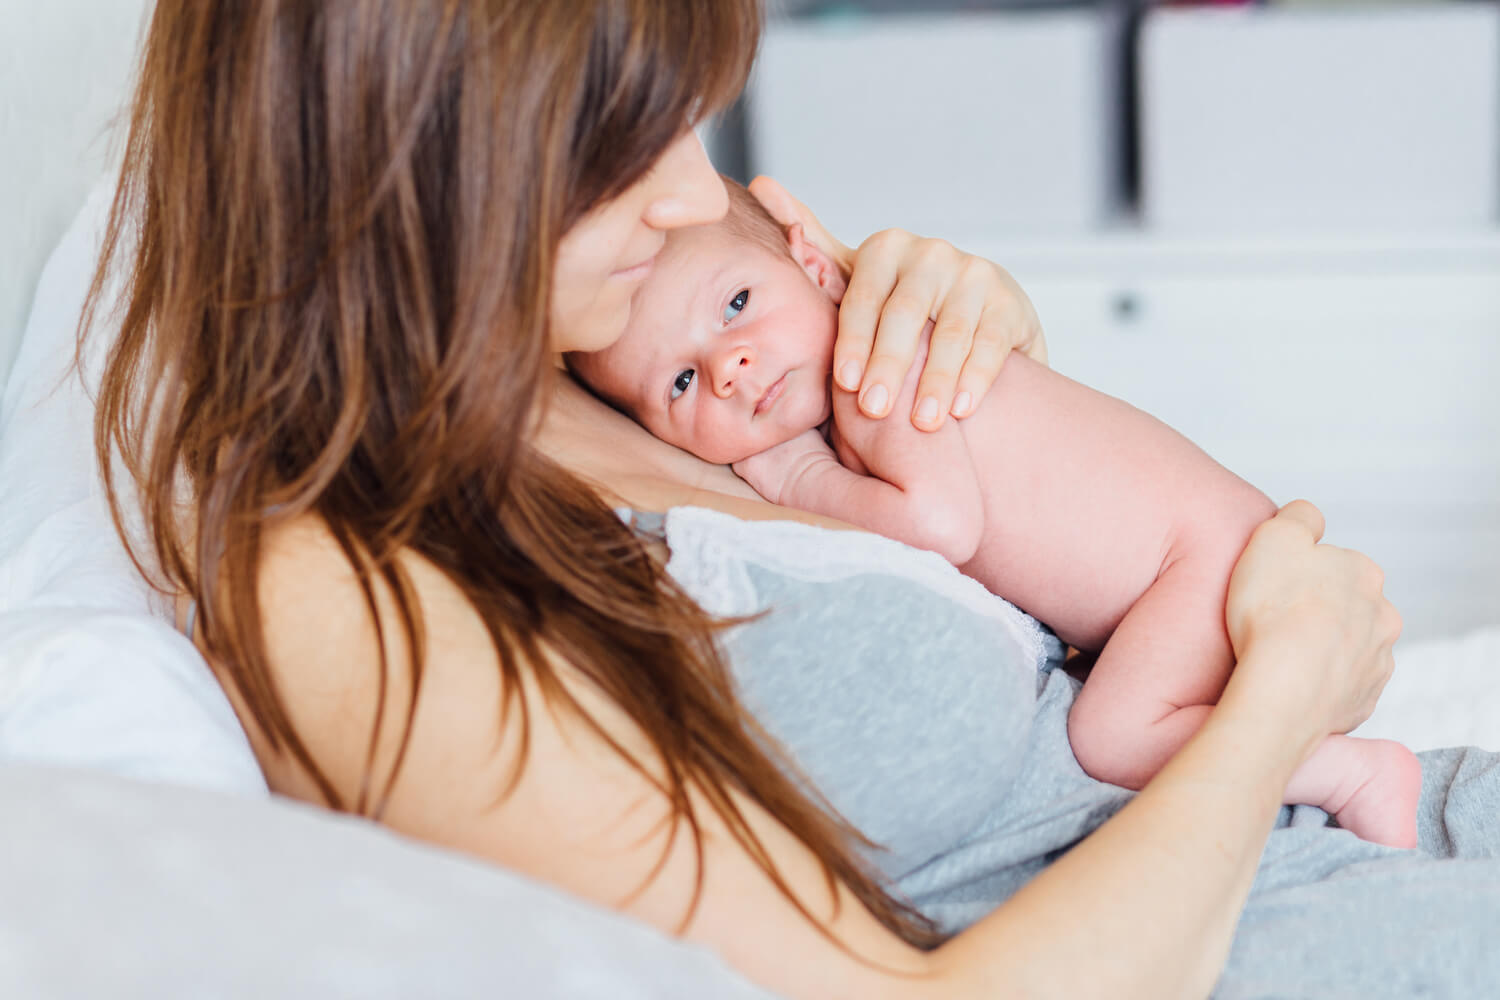 Benefits of Skin-to-Skin Contact With Newborn